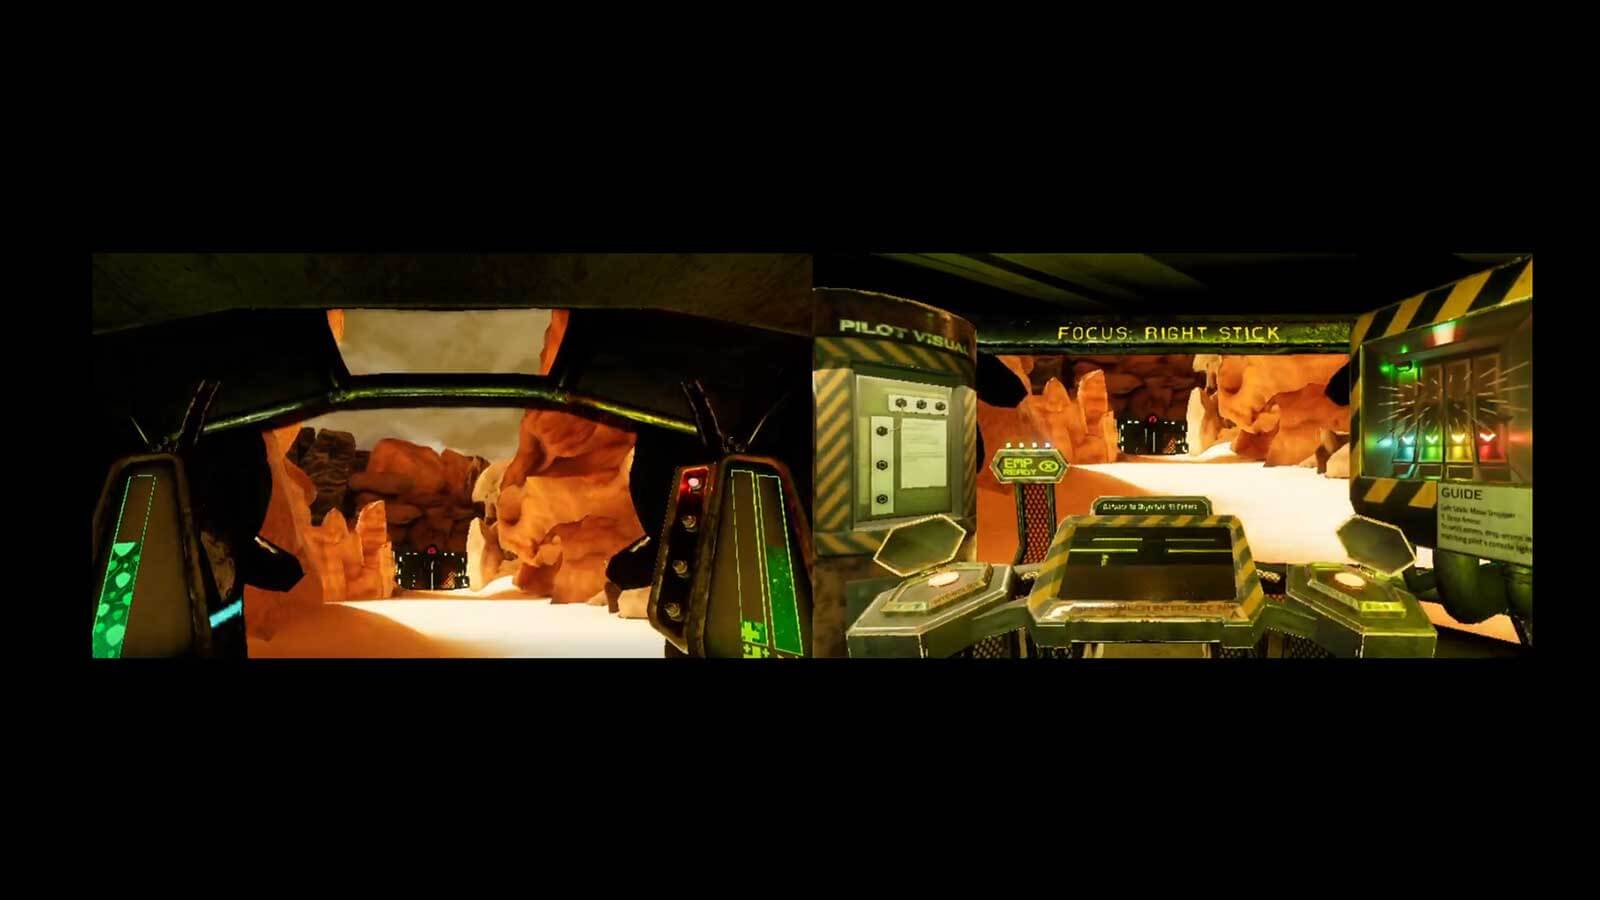 Side-by-side view of mech suit piloting cockpit and engineering controls